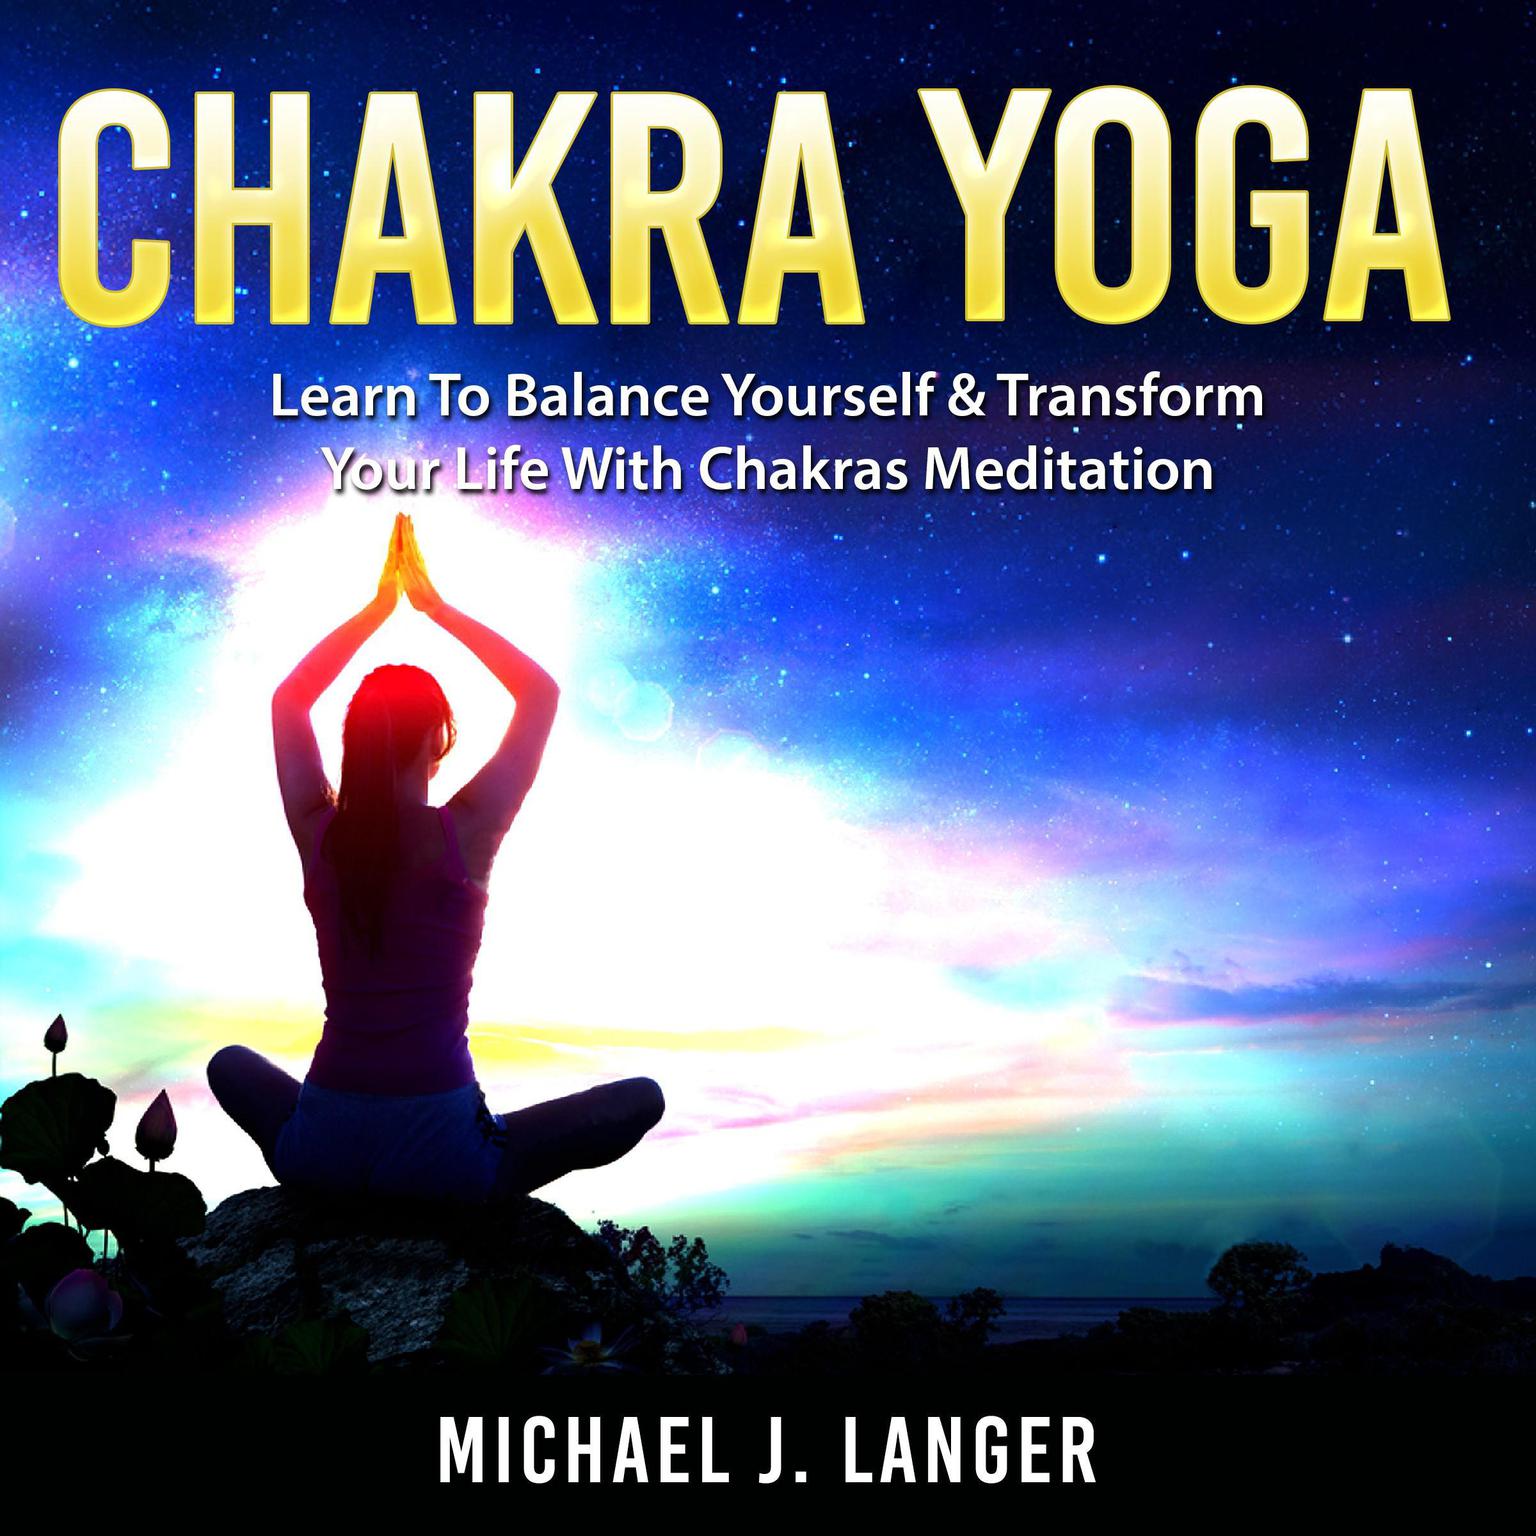 Chakra Yoga: Learn To Balance Yourself & Transform Your Life With Chakras Meditation Audiobook, by Michael J. Langer